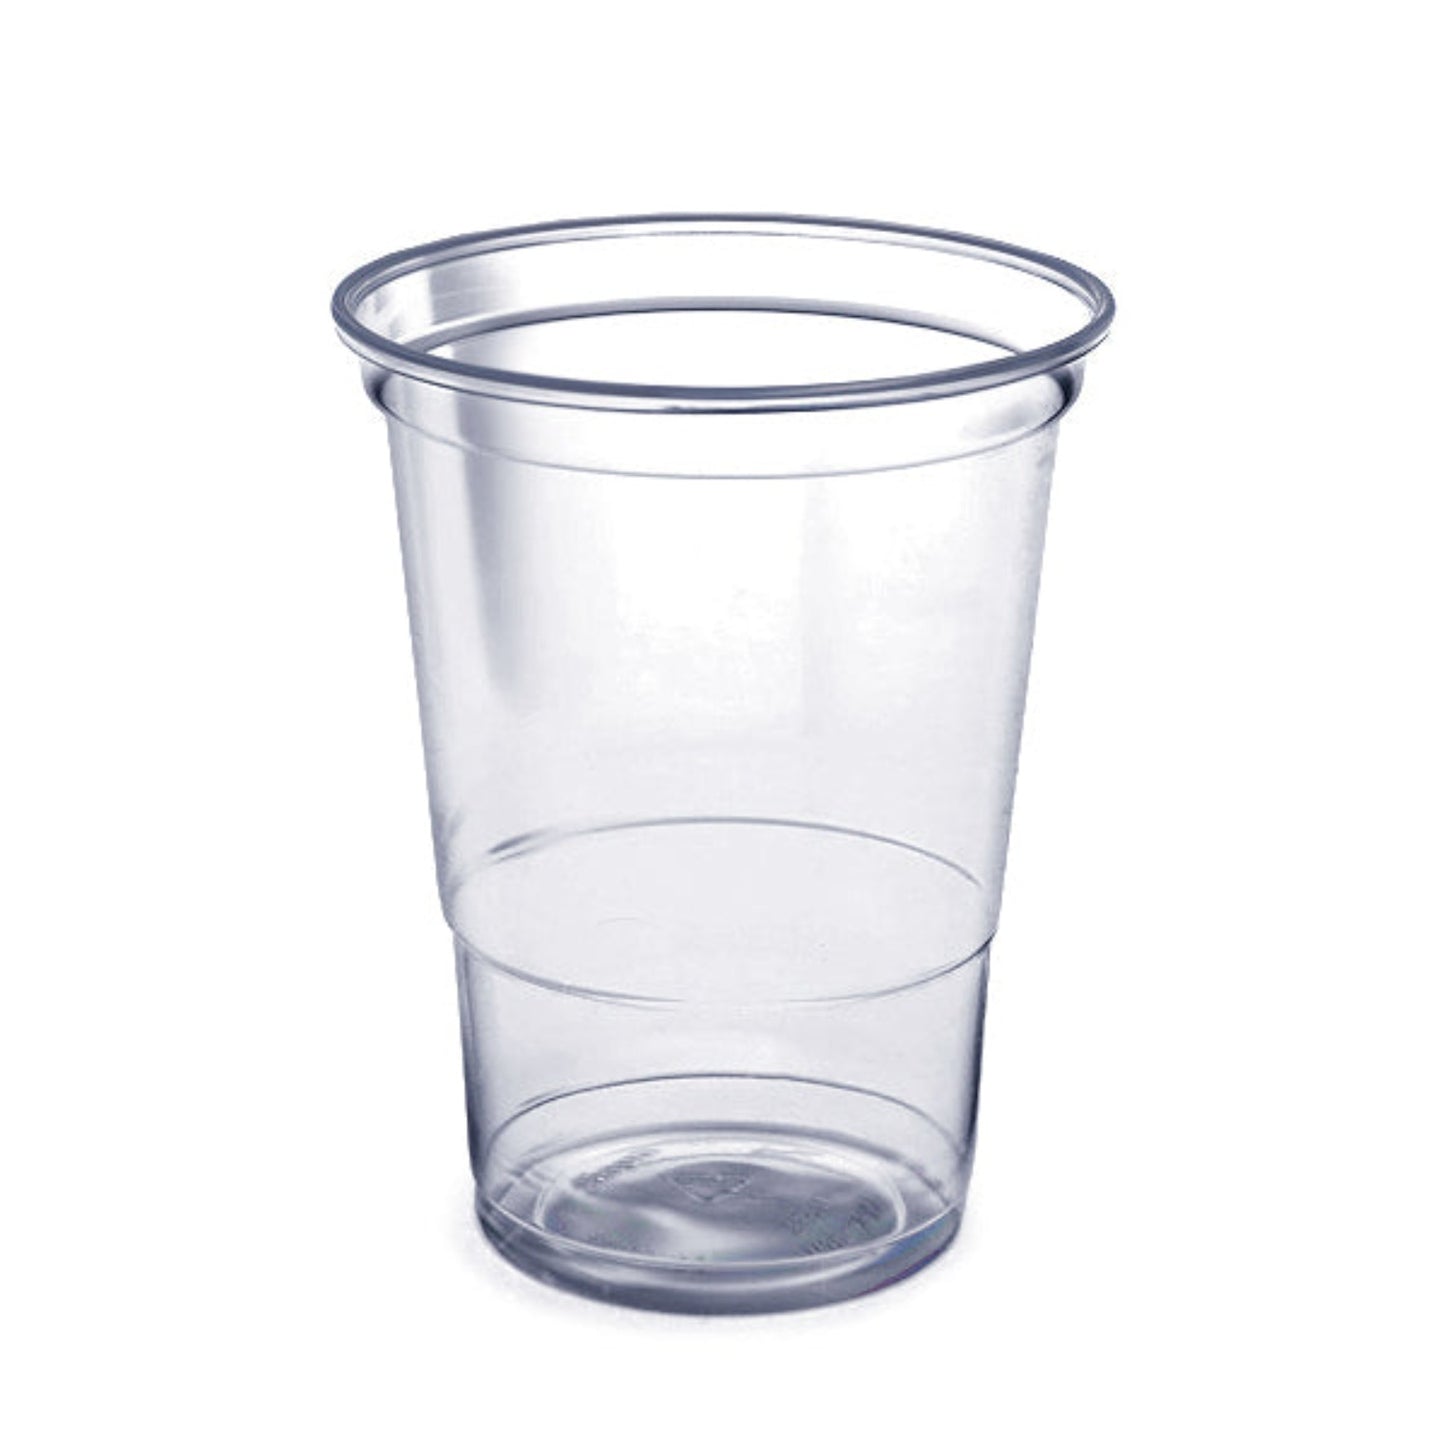 Disposable 2/3 Pint CE Marked Beer Glass 1000pk